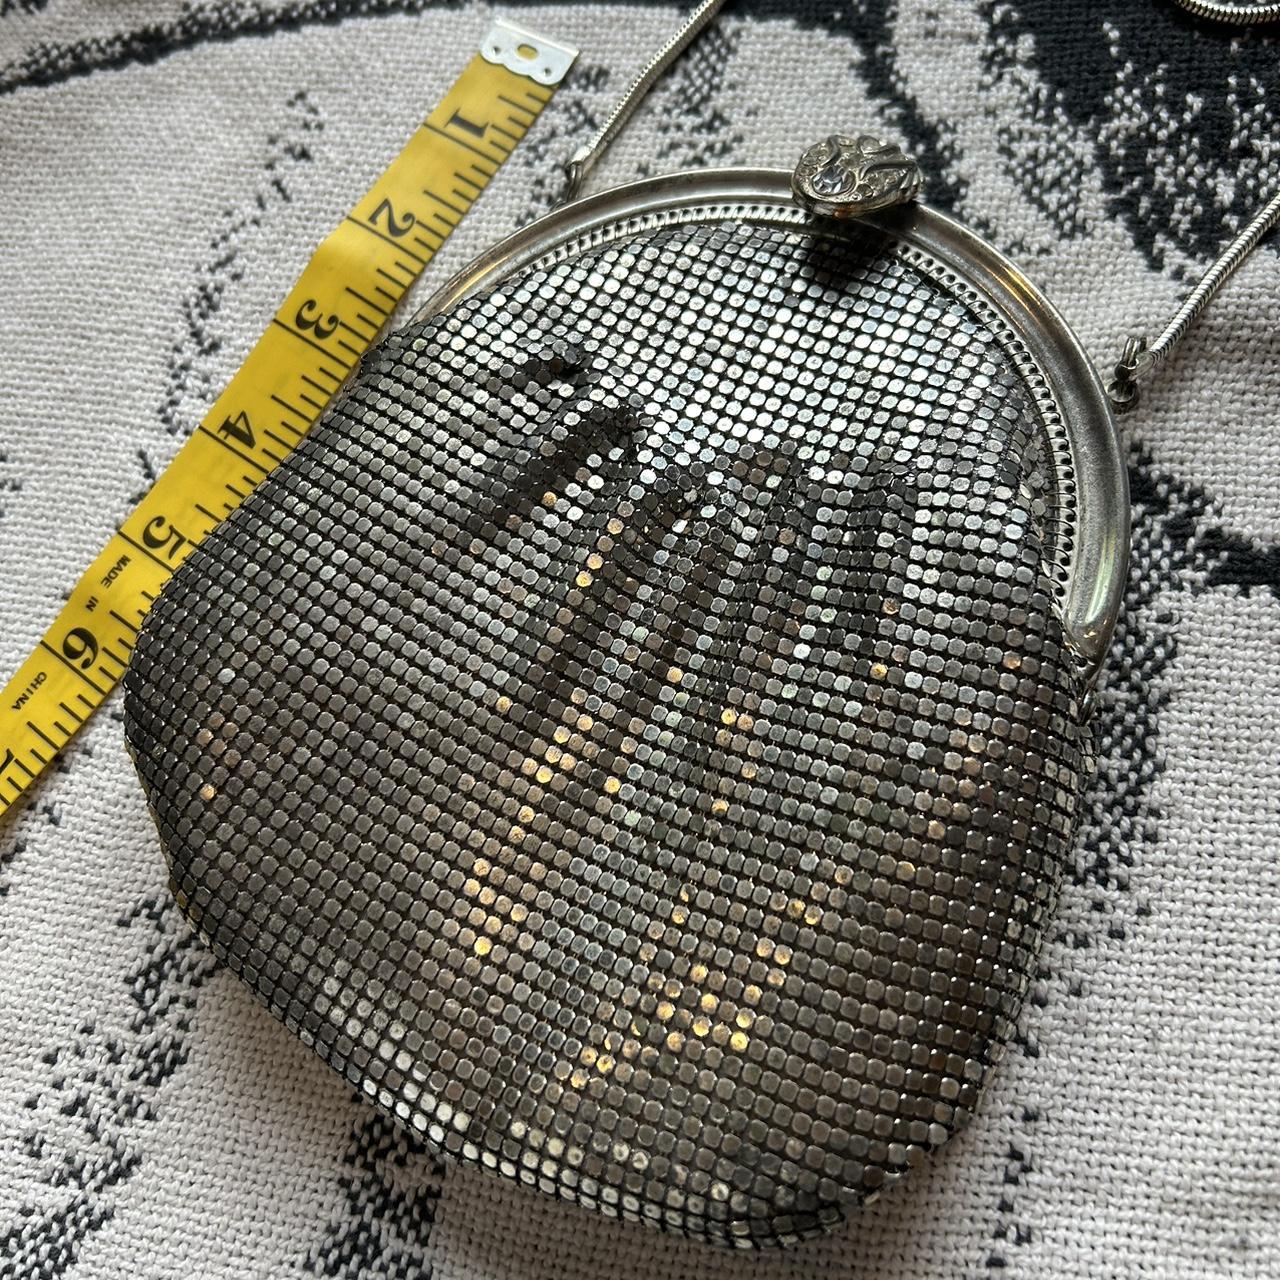 Vintage lined mesh evening bag or antique chain mail purse, Edwardian  c1910s purse, antique EPNS mesh bag, and with blue glass kiss clasp